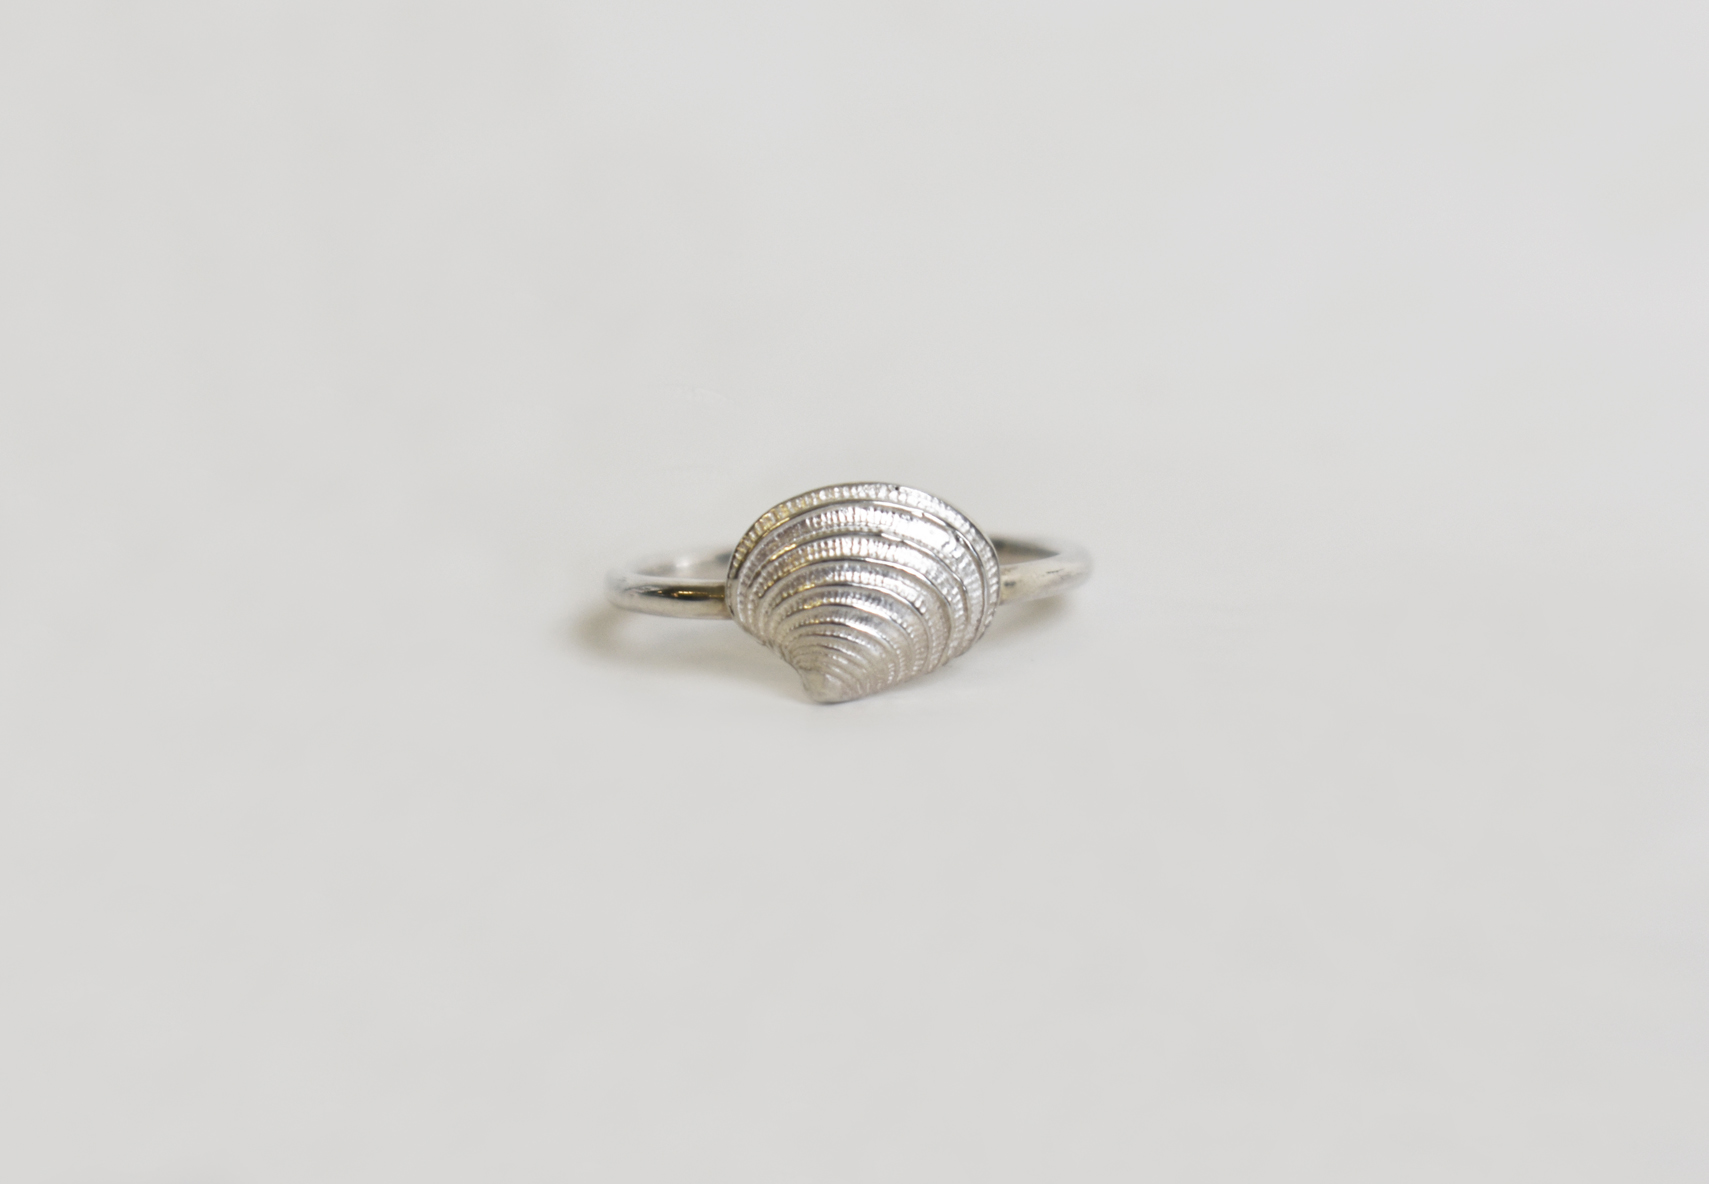 Scallop ring1 k